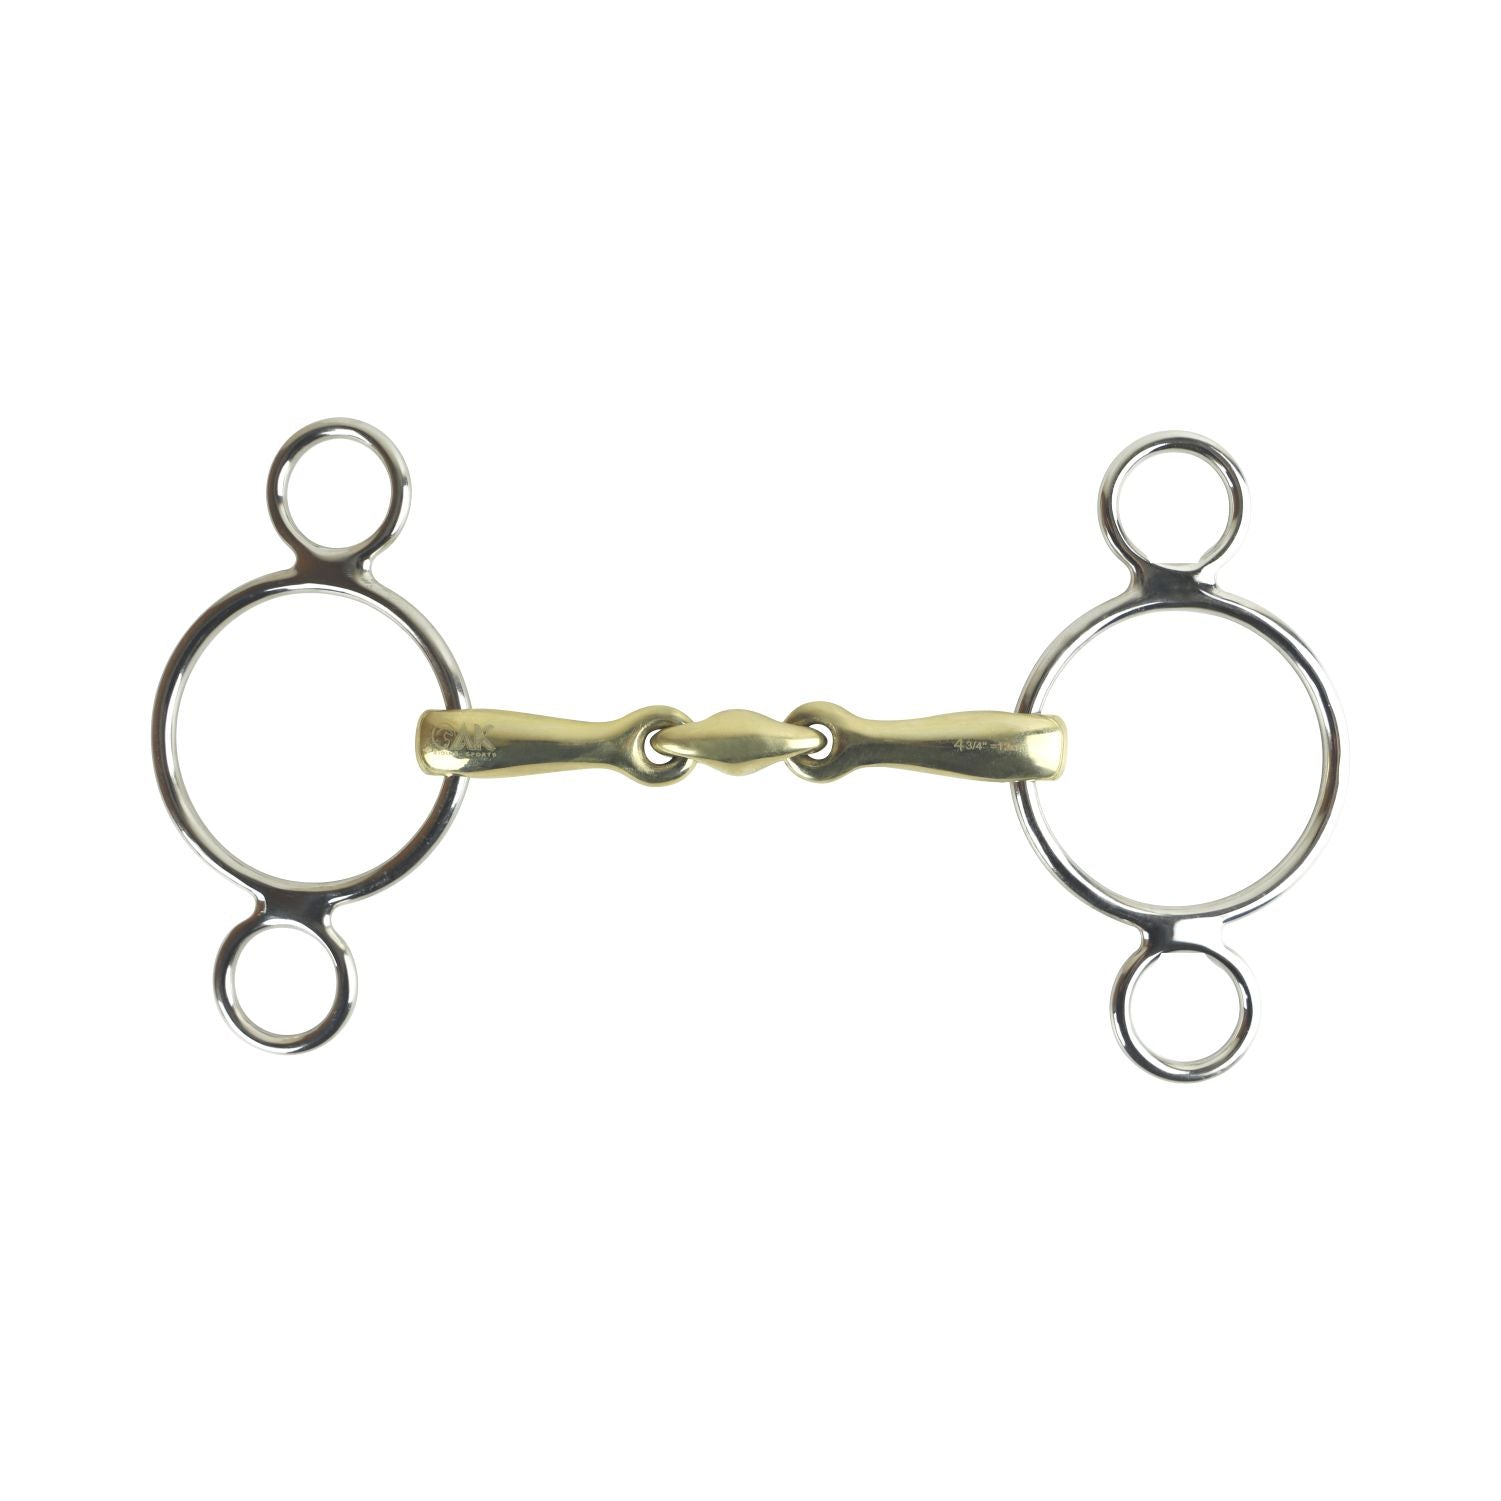 AK 3-Ring Gag with Double Jointed Bits